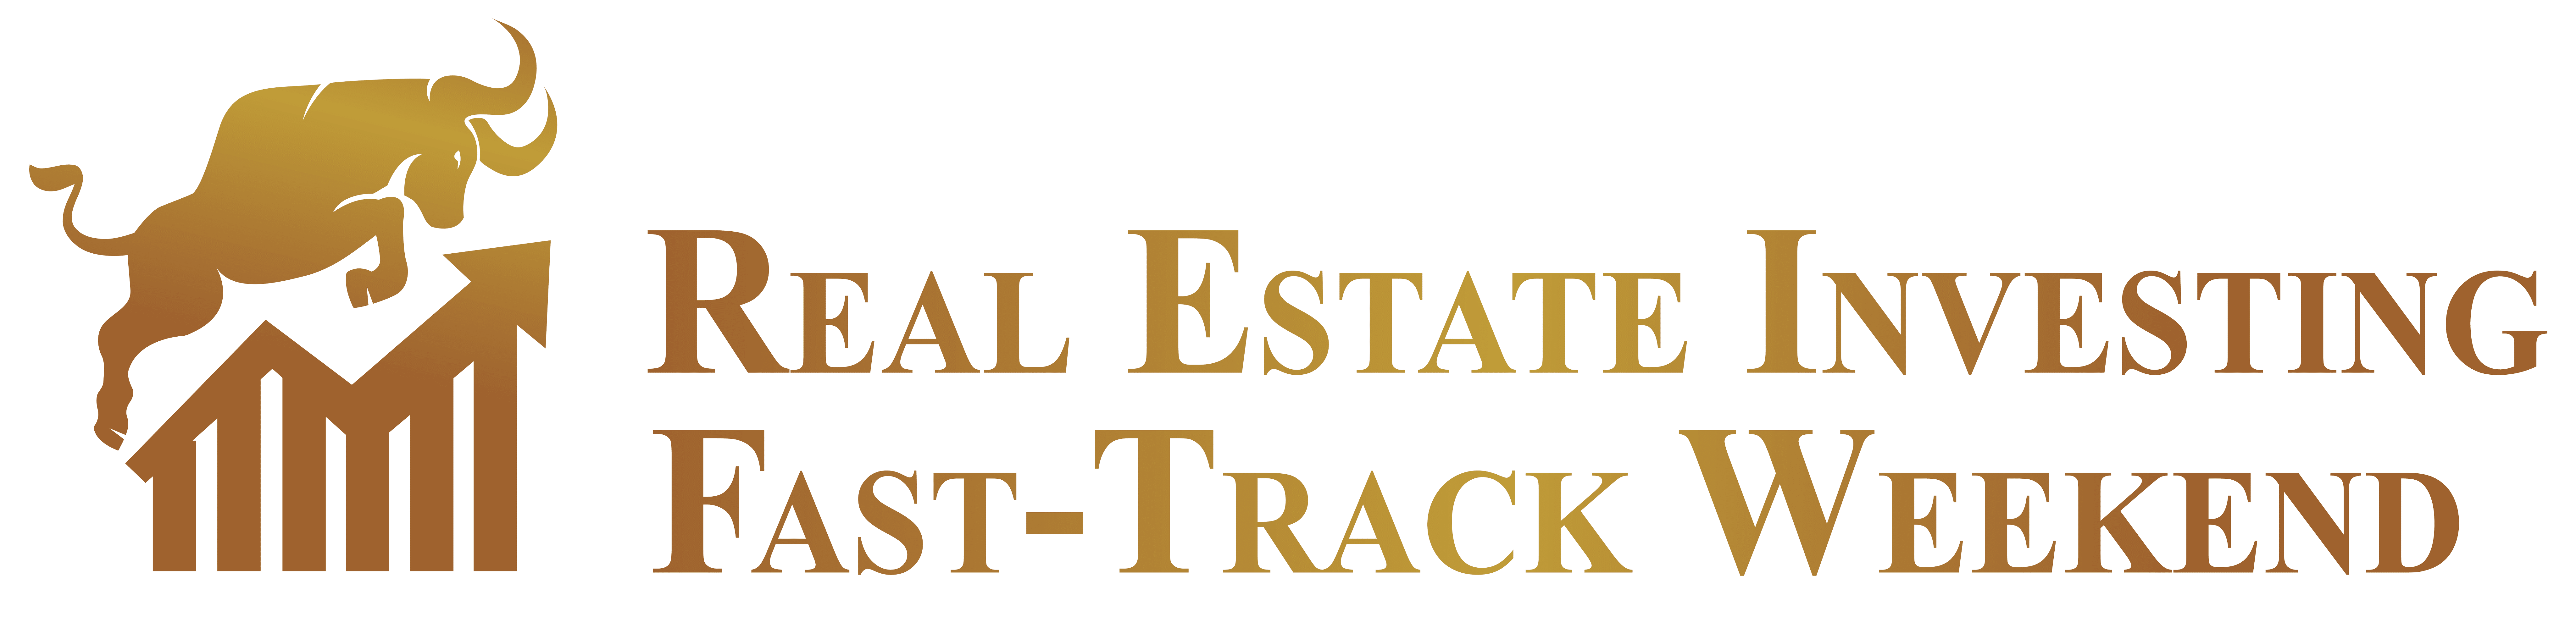 Real Estate Investing Fast-Track Weekend Logo